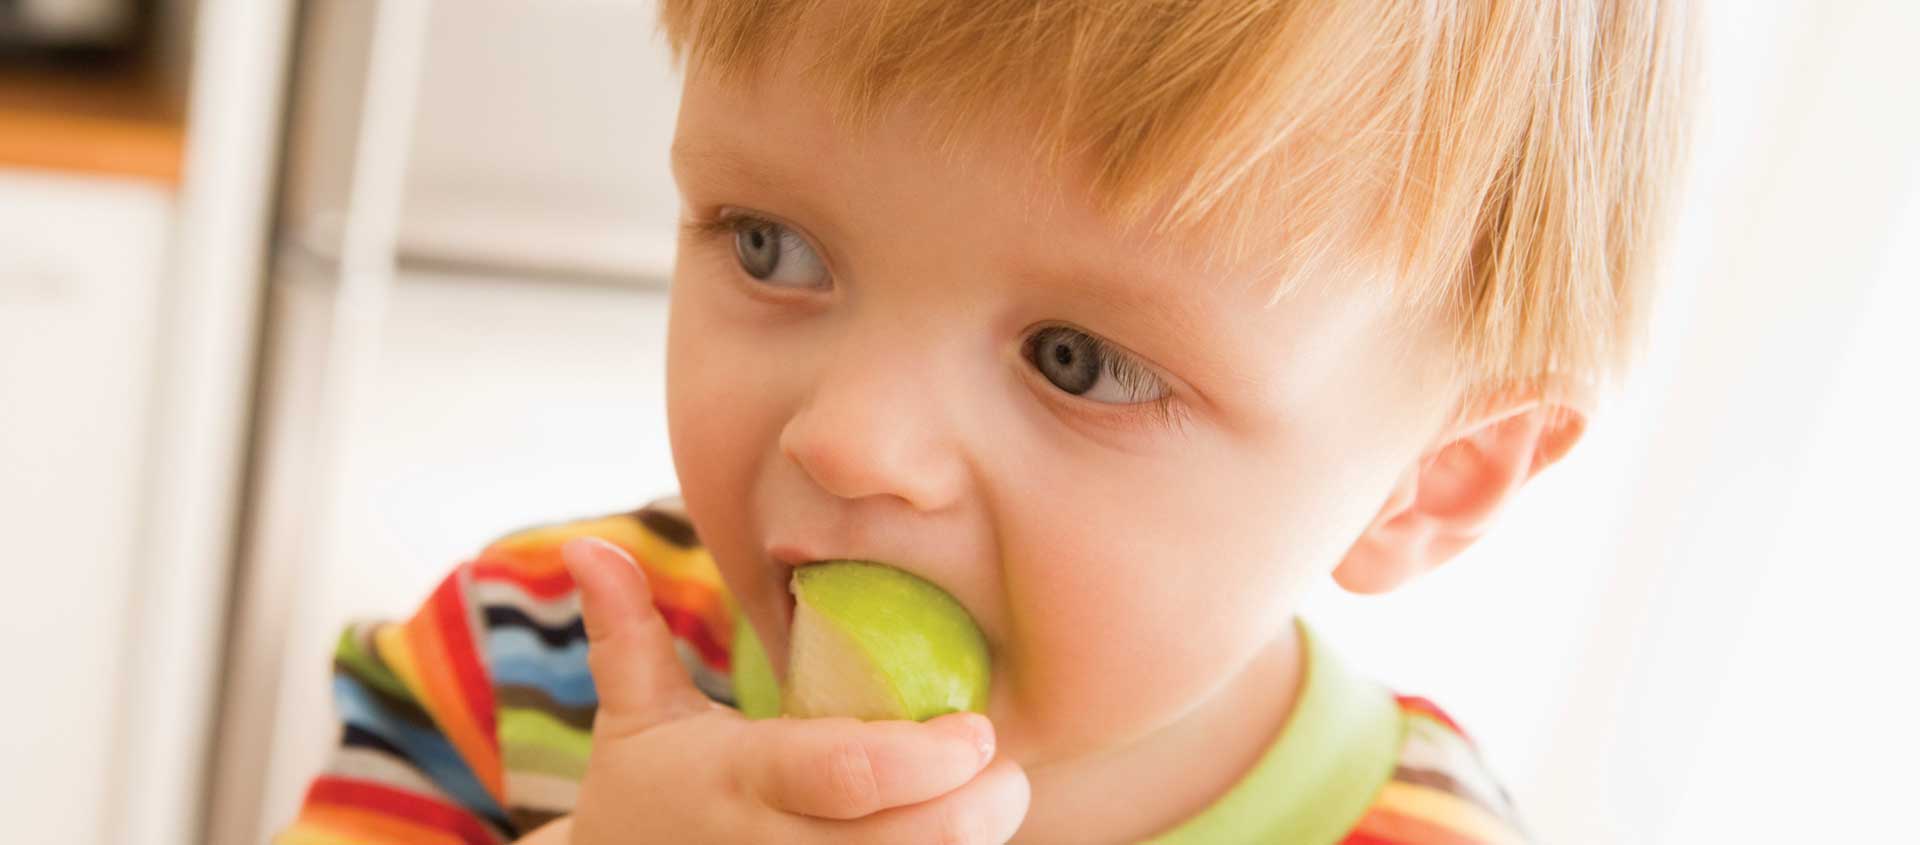 A young child gnaws on an apple slice.